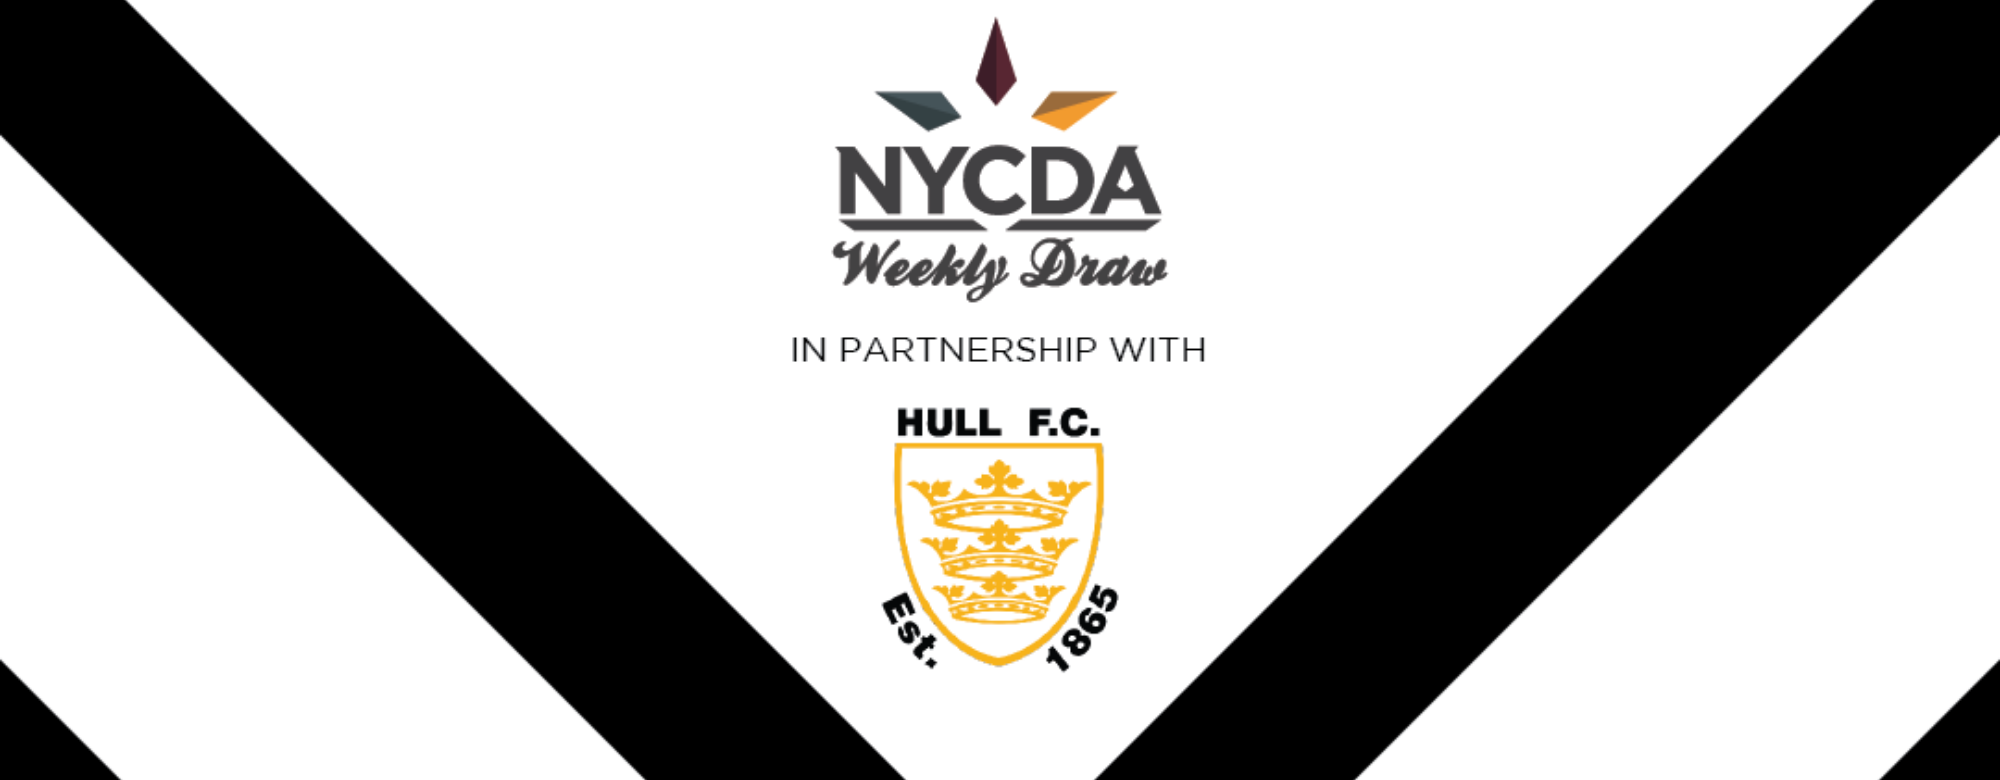 Join Hull FC Lottery With NYCDA To Support Centre Of Excellence